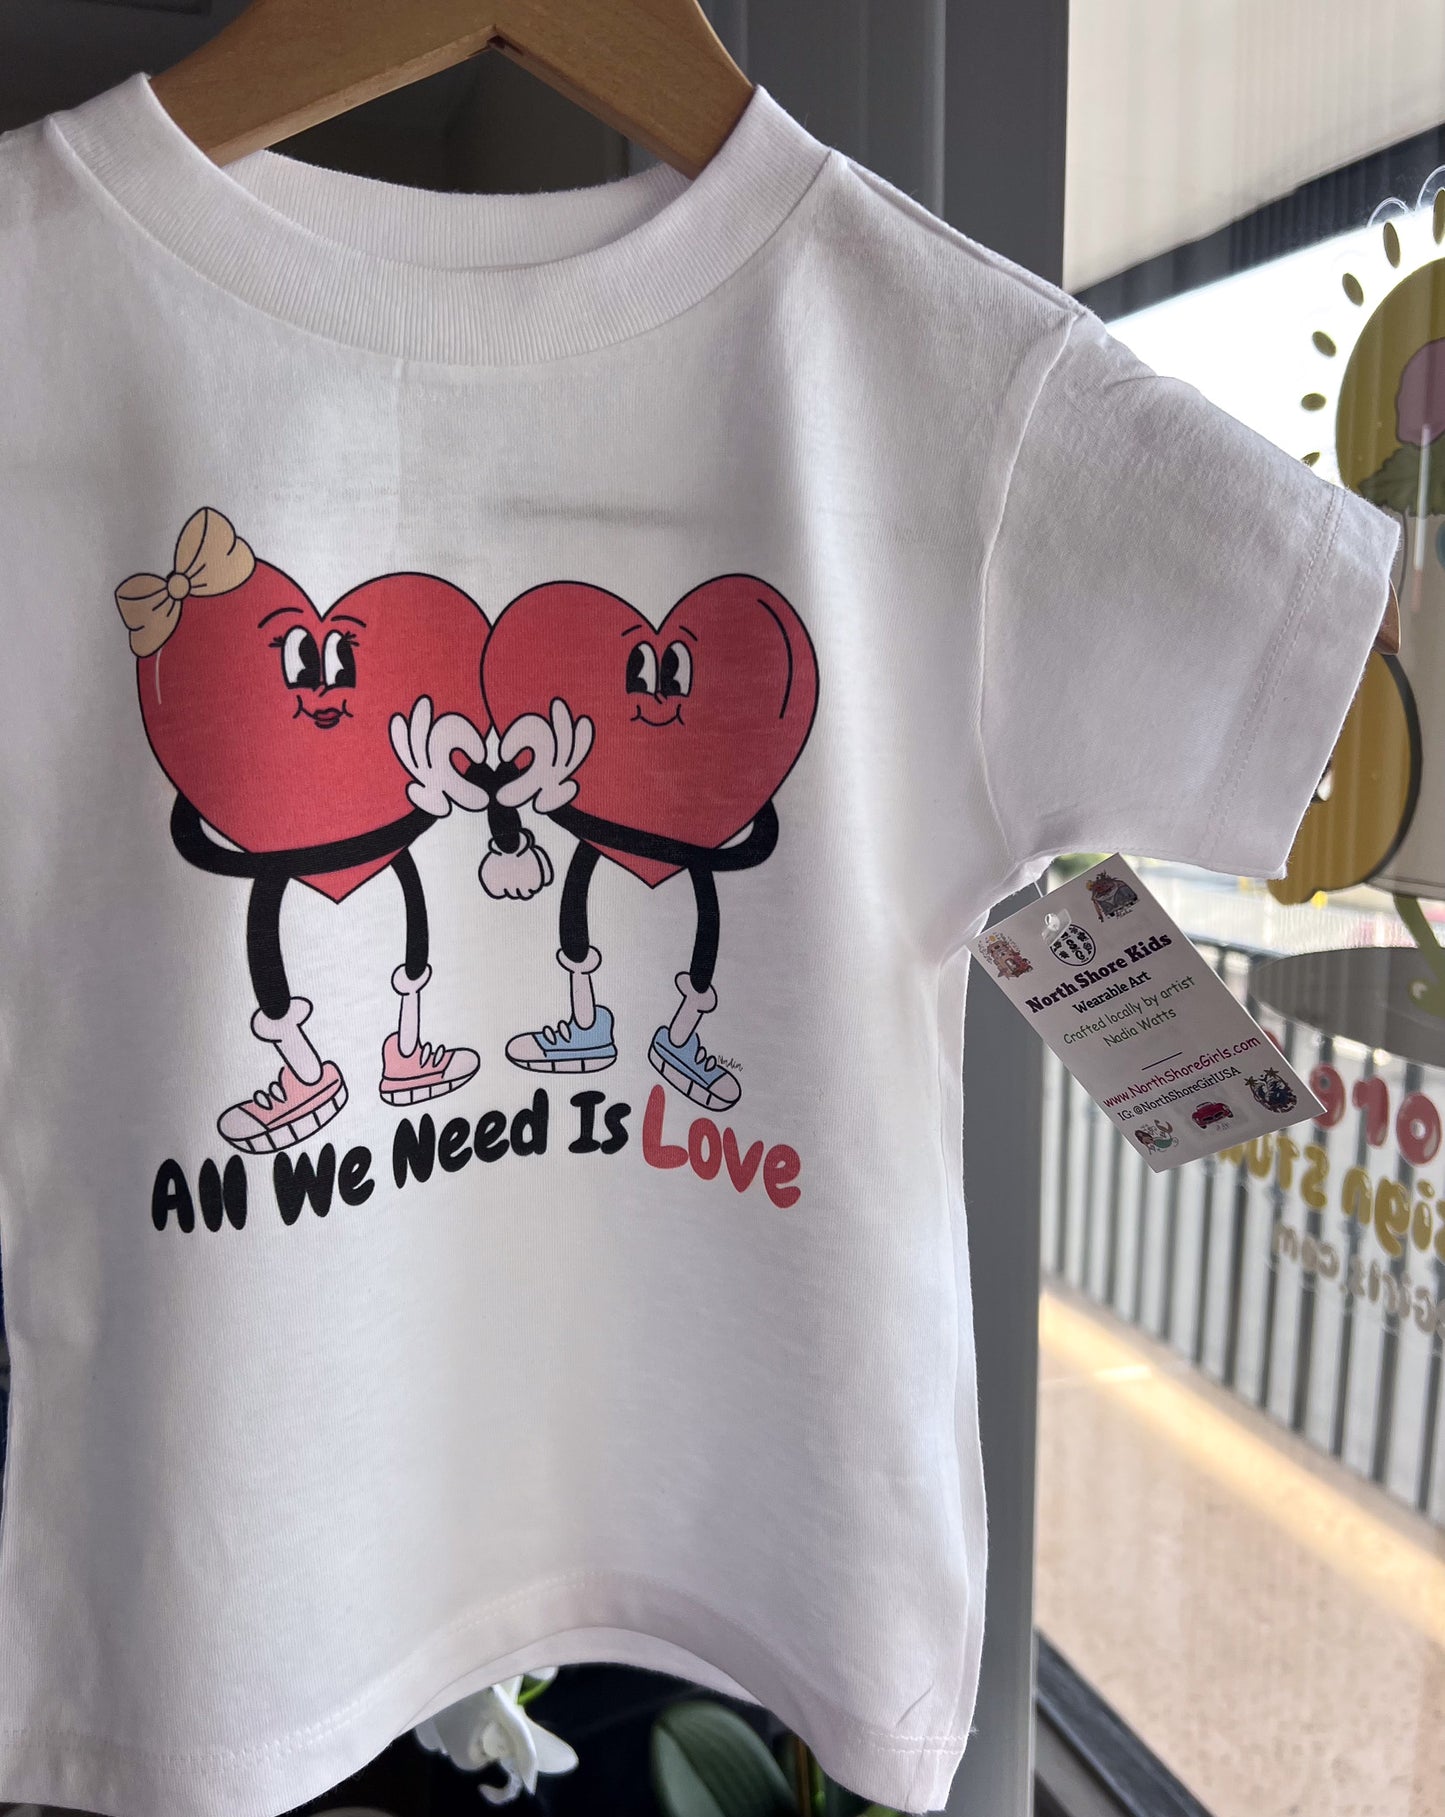 All we need is love graphic tee for small kids